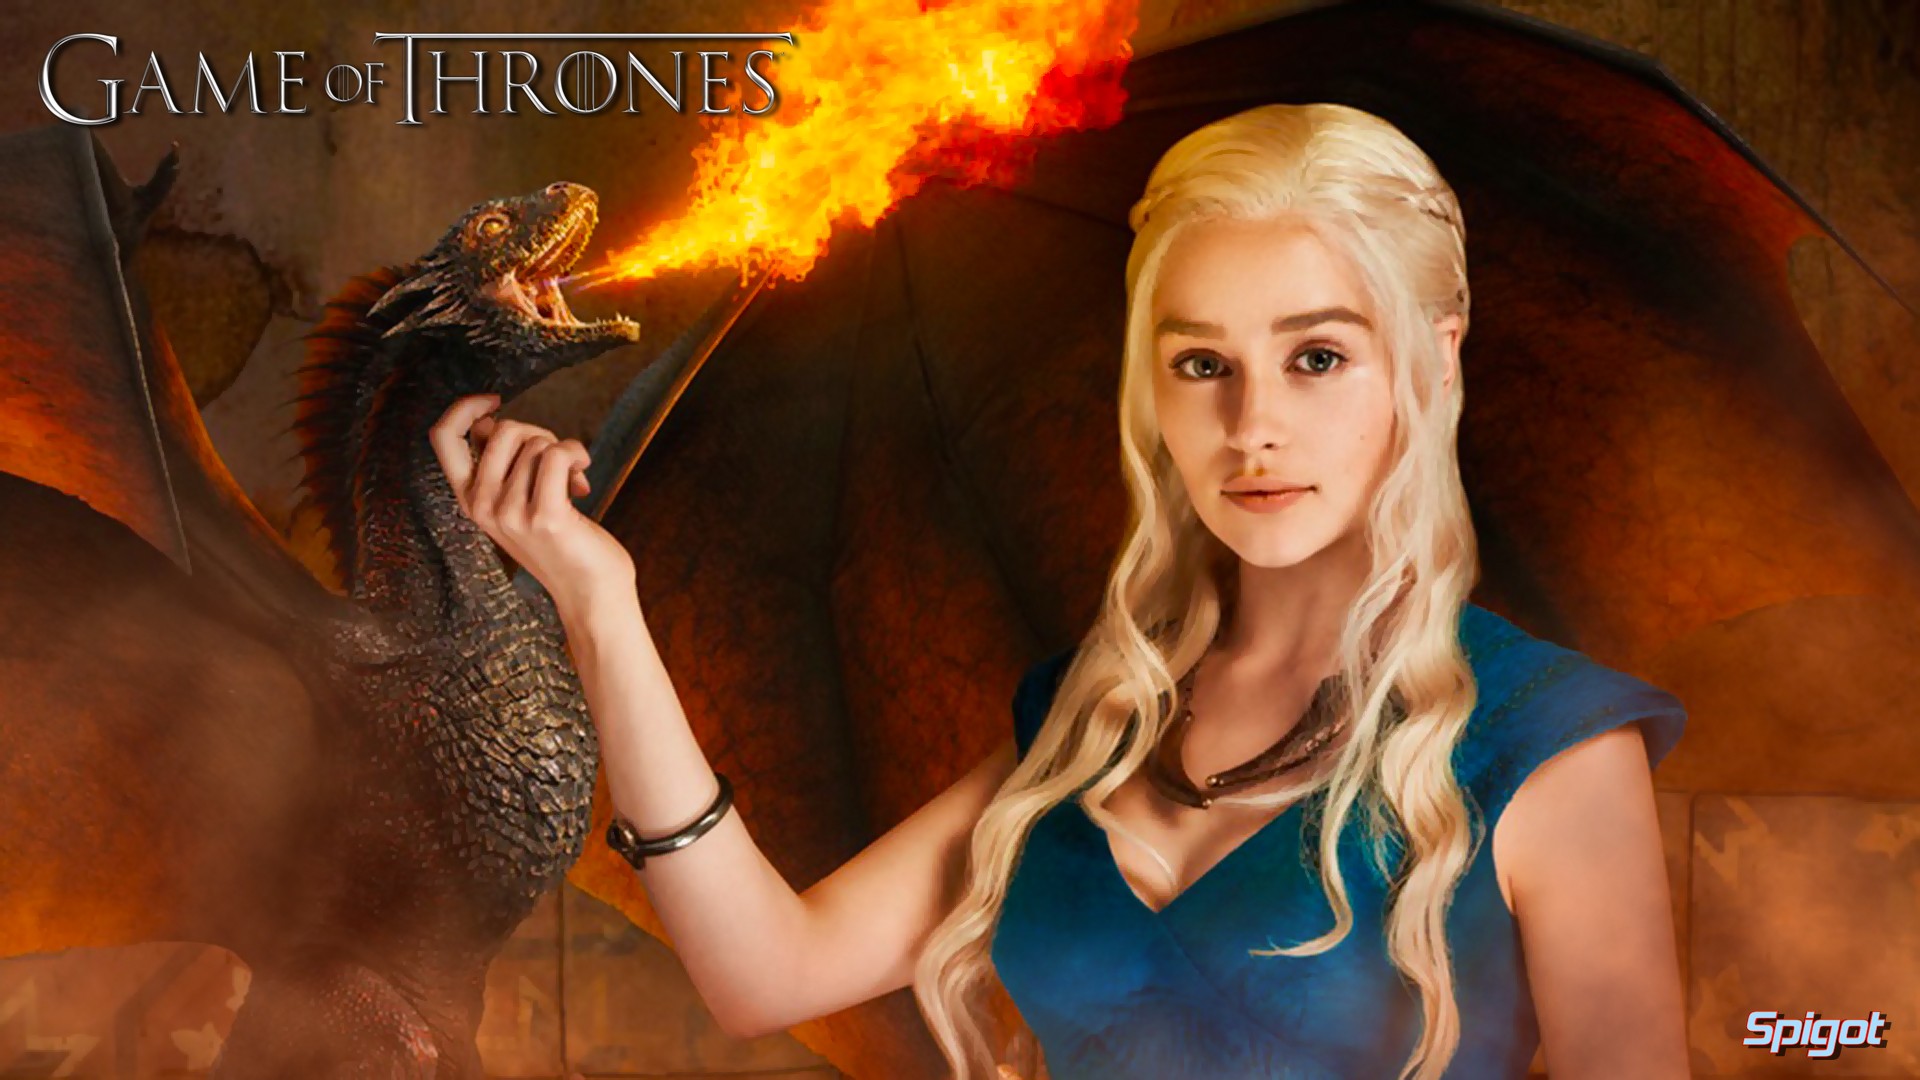  Dany Dragon Wallpaper HD wallpaper and background photos 34476263